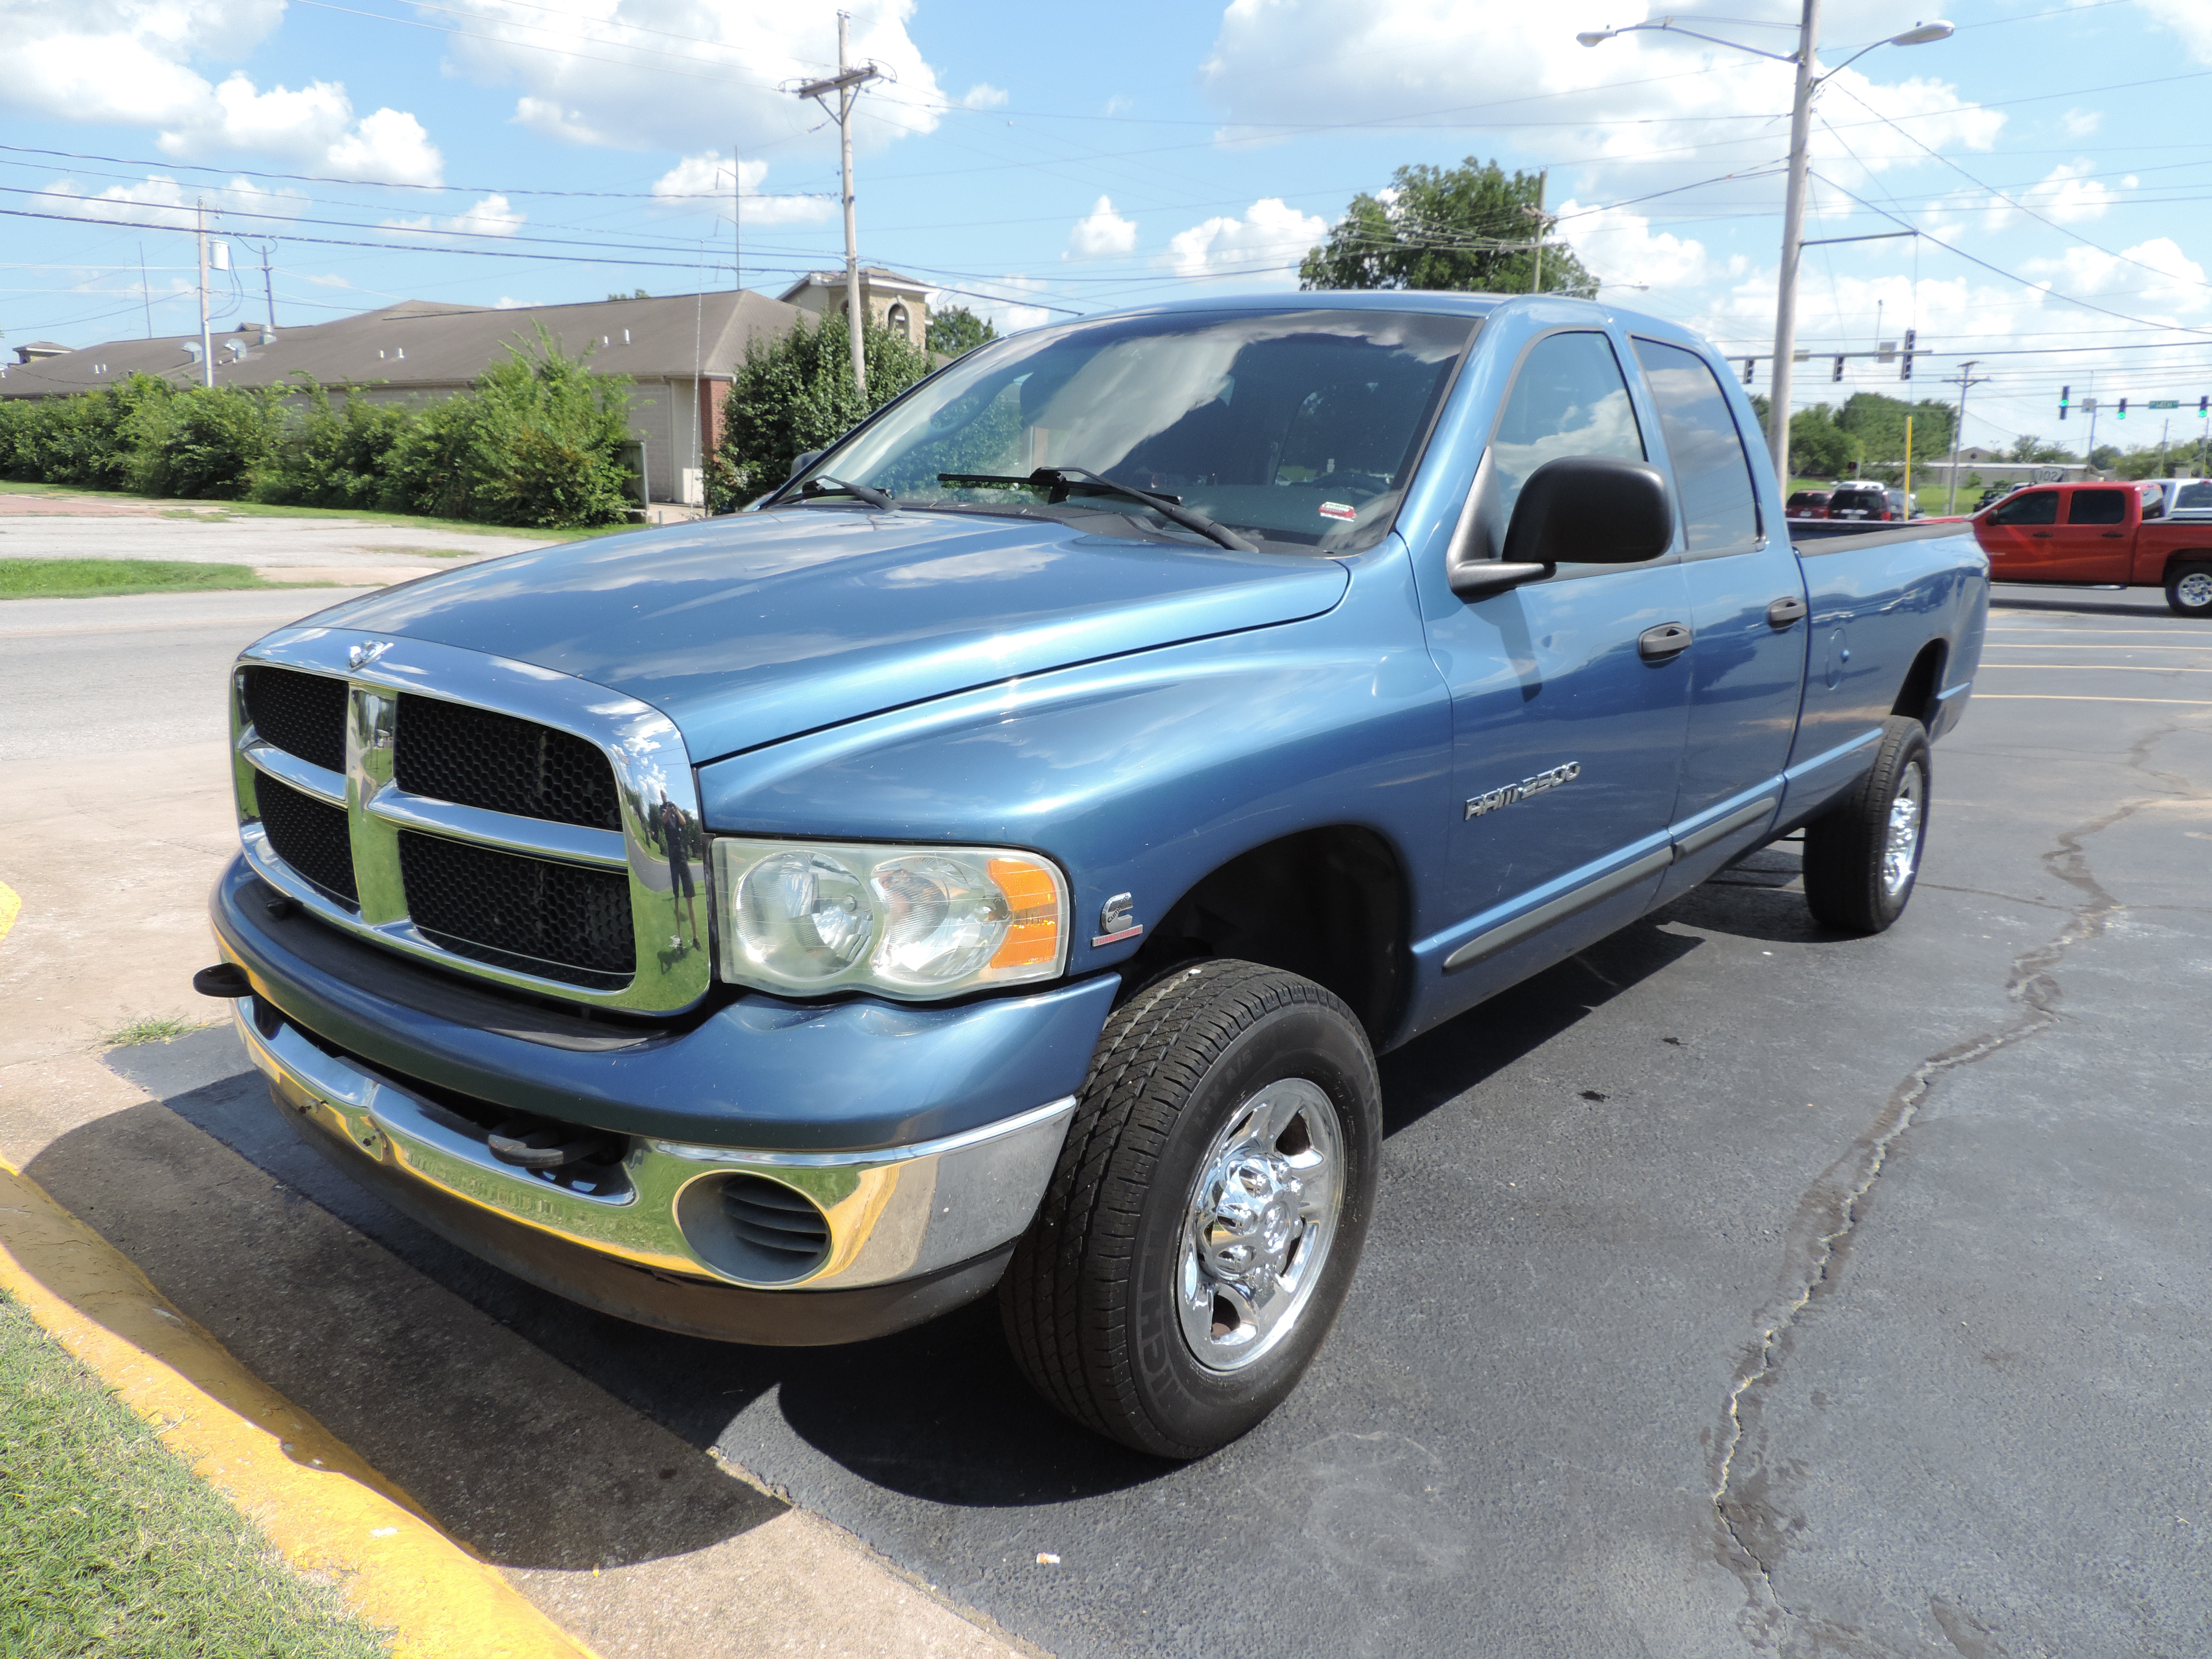 Autowerks of NWA | Used 2003 Blue Dodge Ram 2500 For Sale In 2003 Dodge Ram 2500 5.7 Hemi Problems